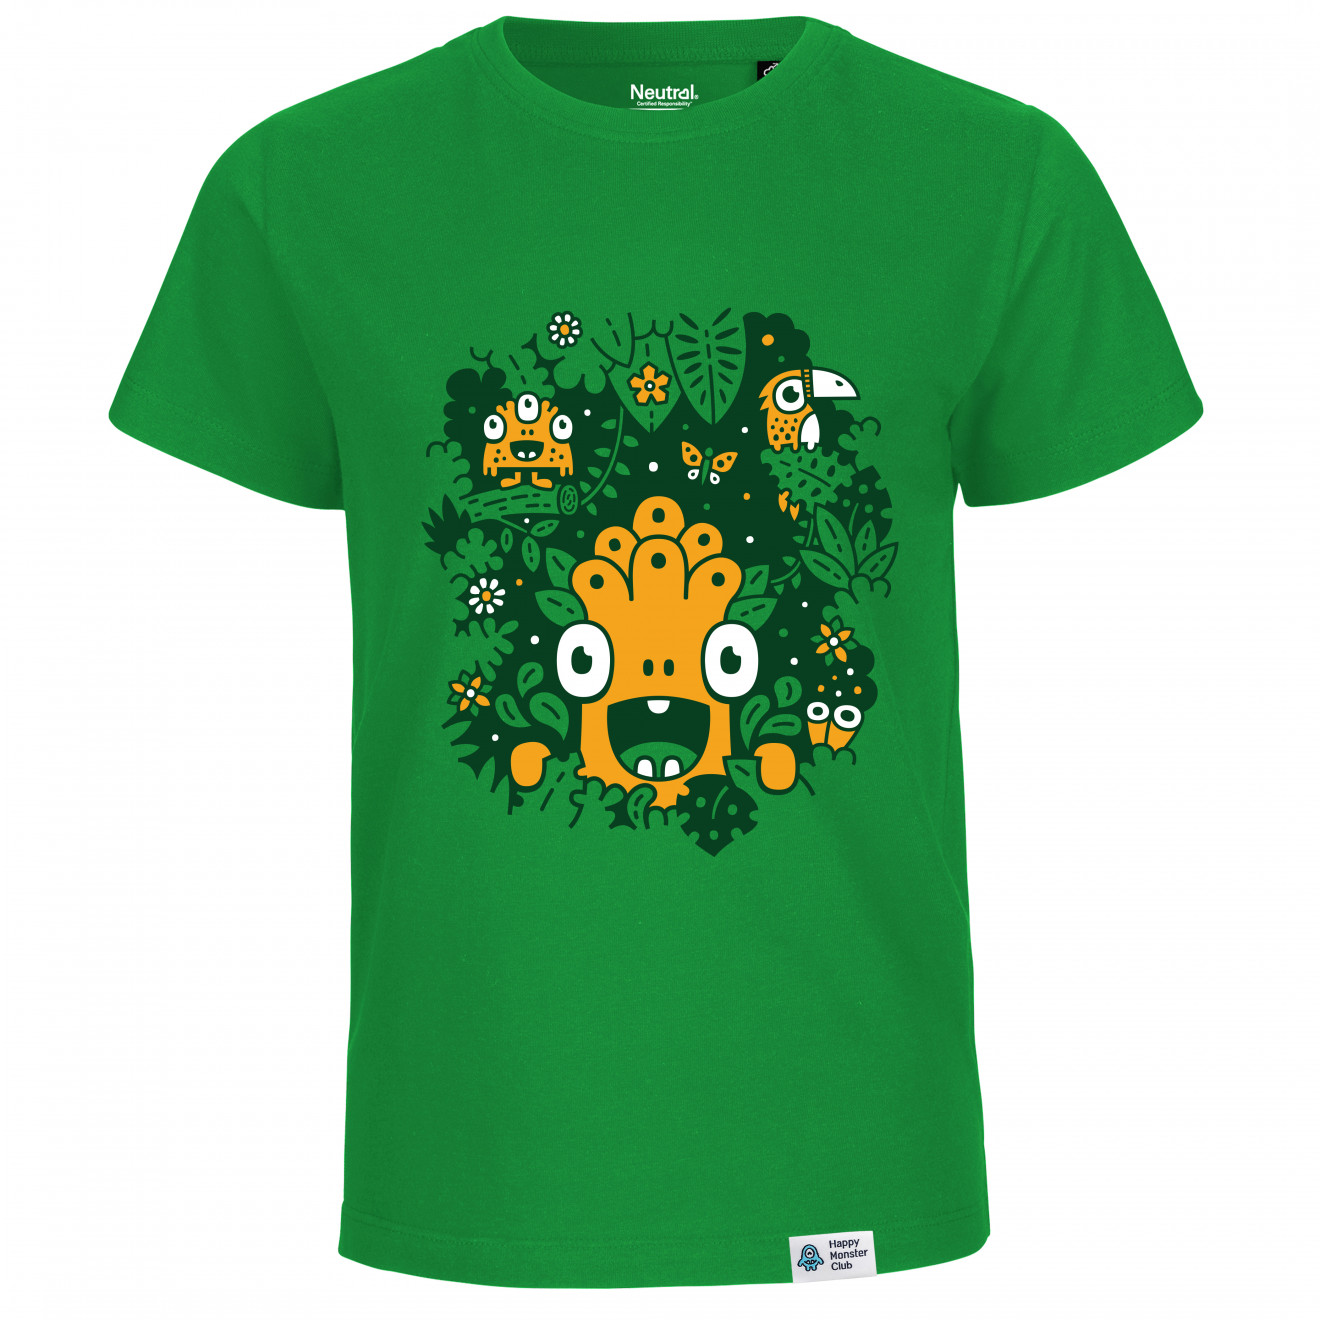 Image of the product Mighty jungle, from the product category T-shirts